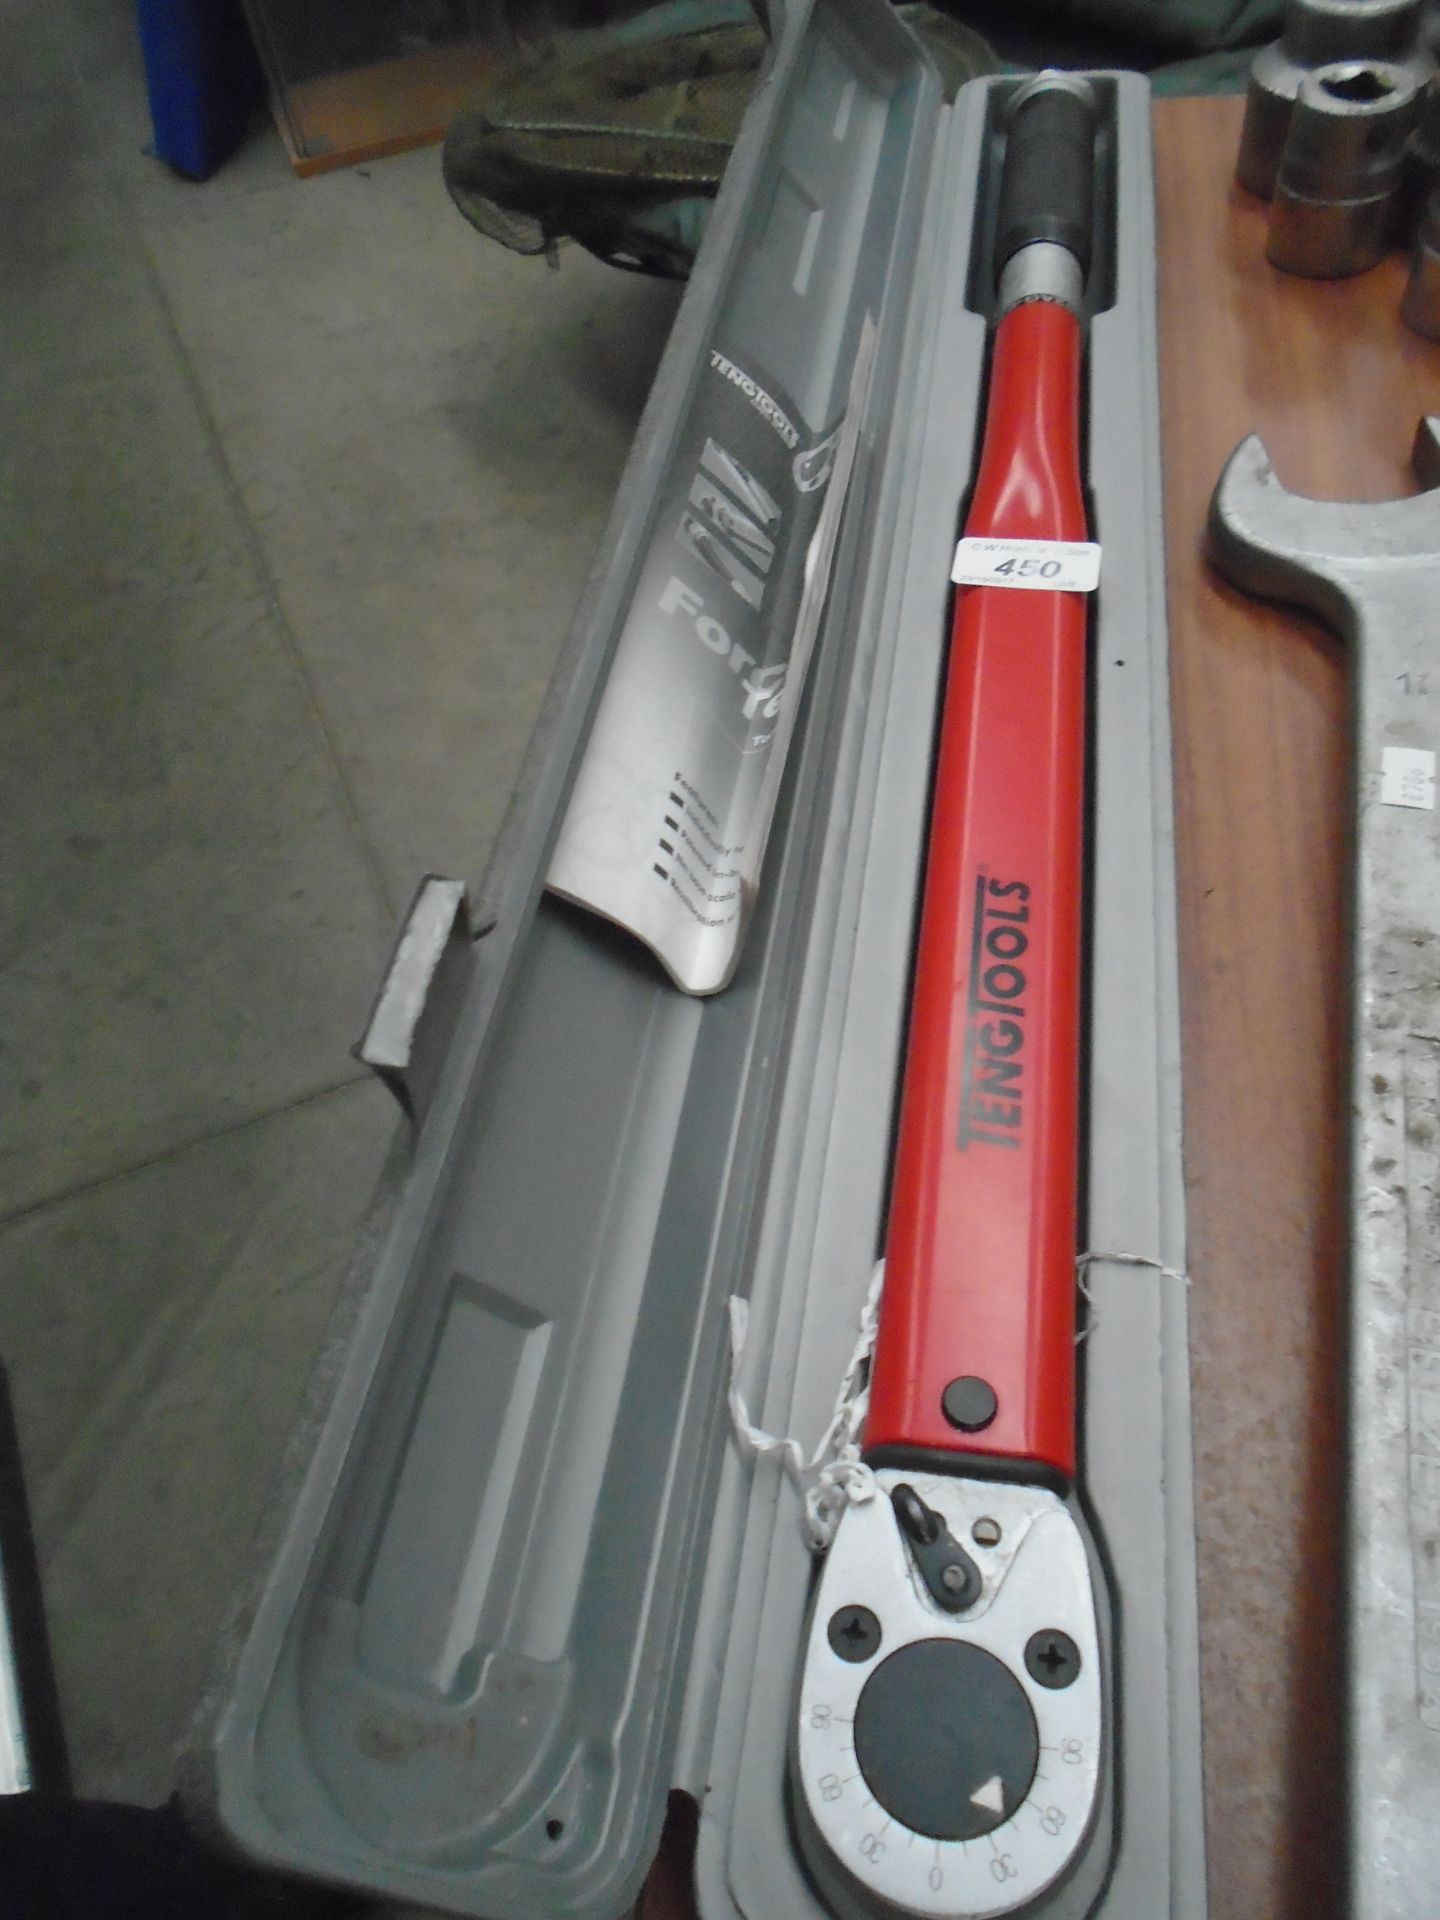 A Tengtools force teng torque wrench in case with manual